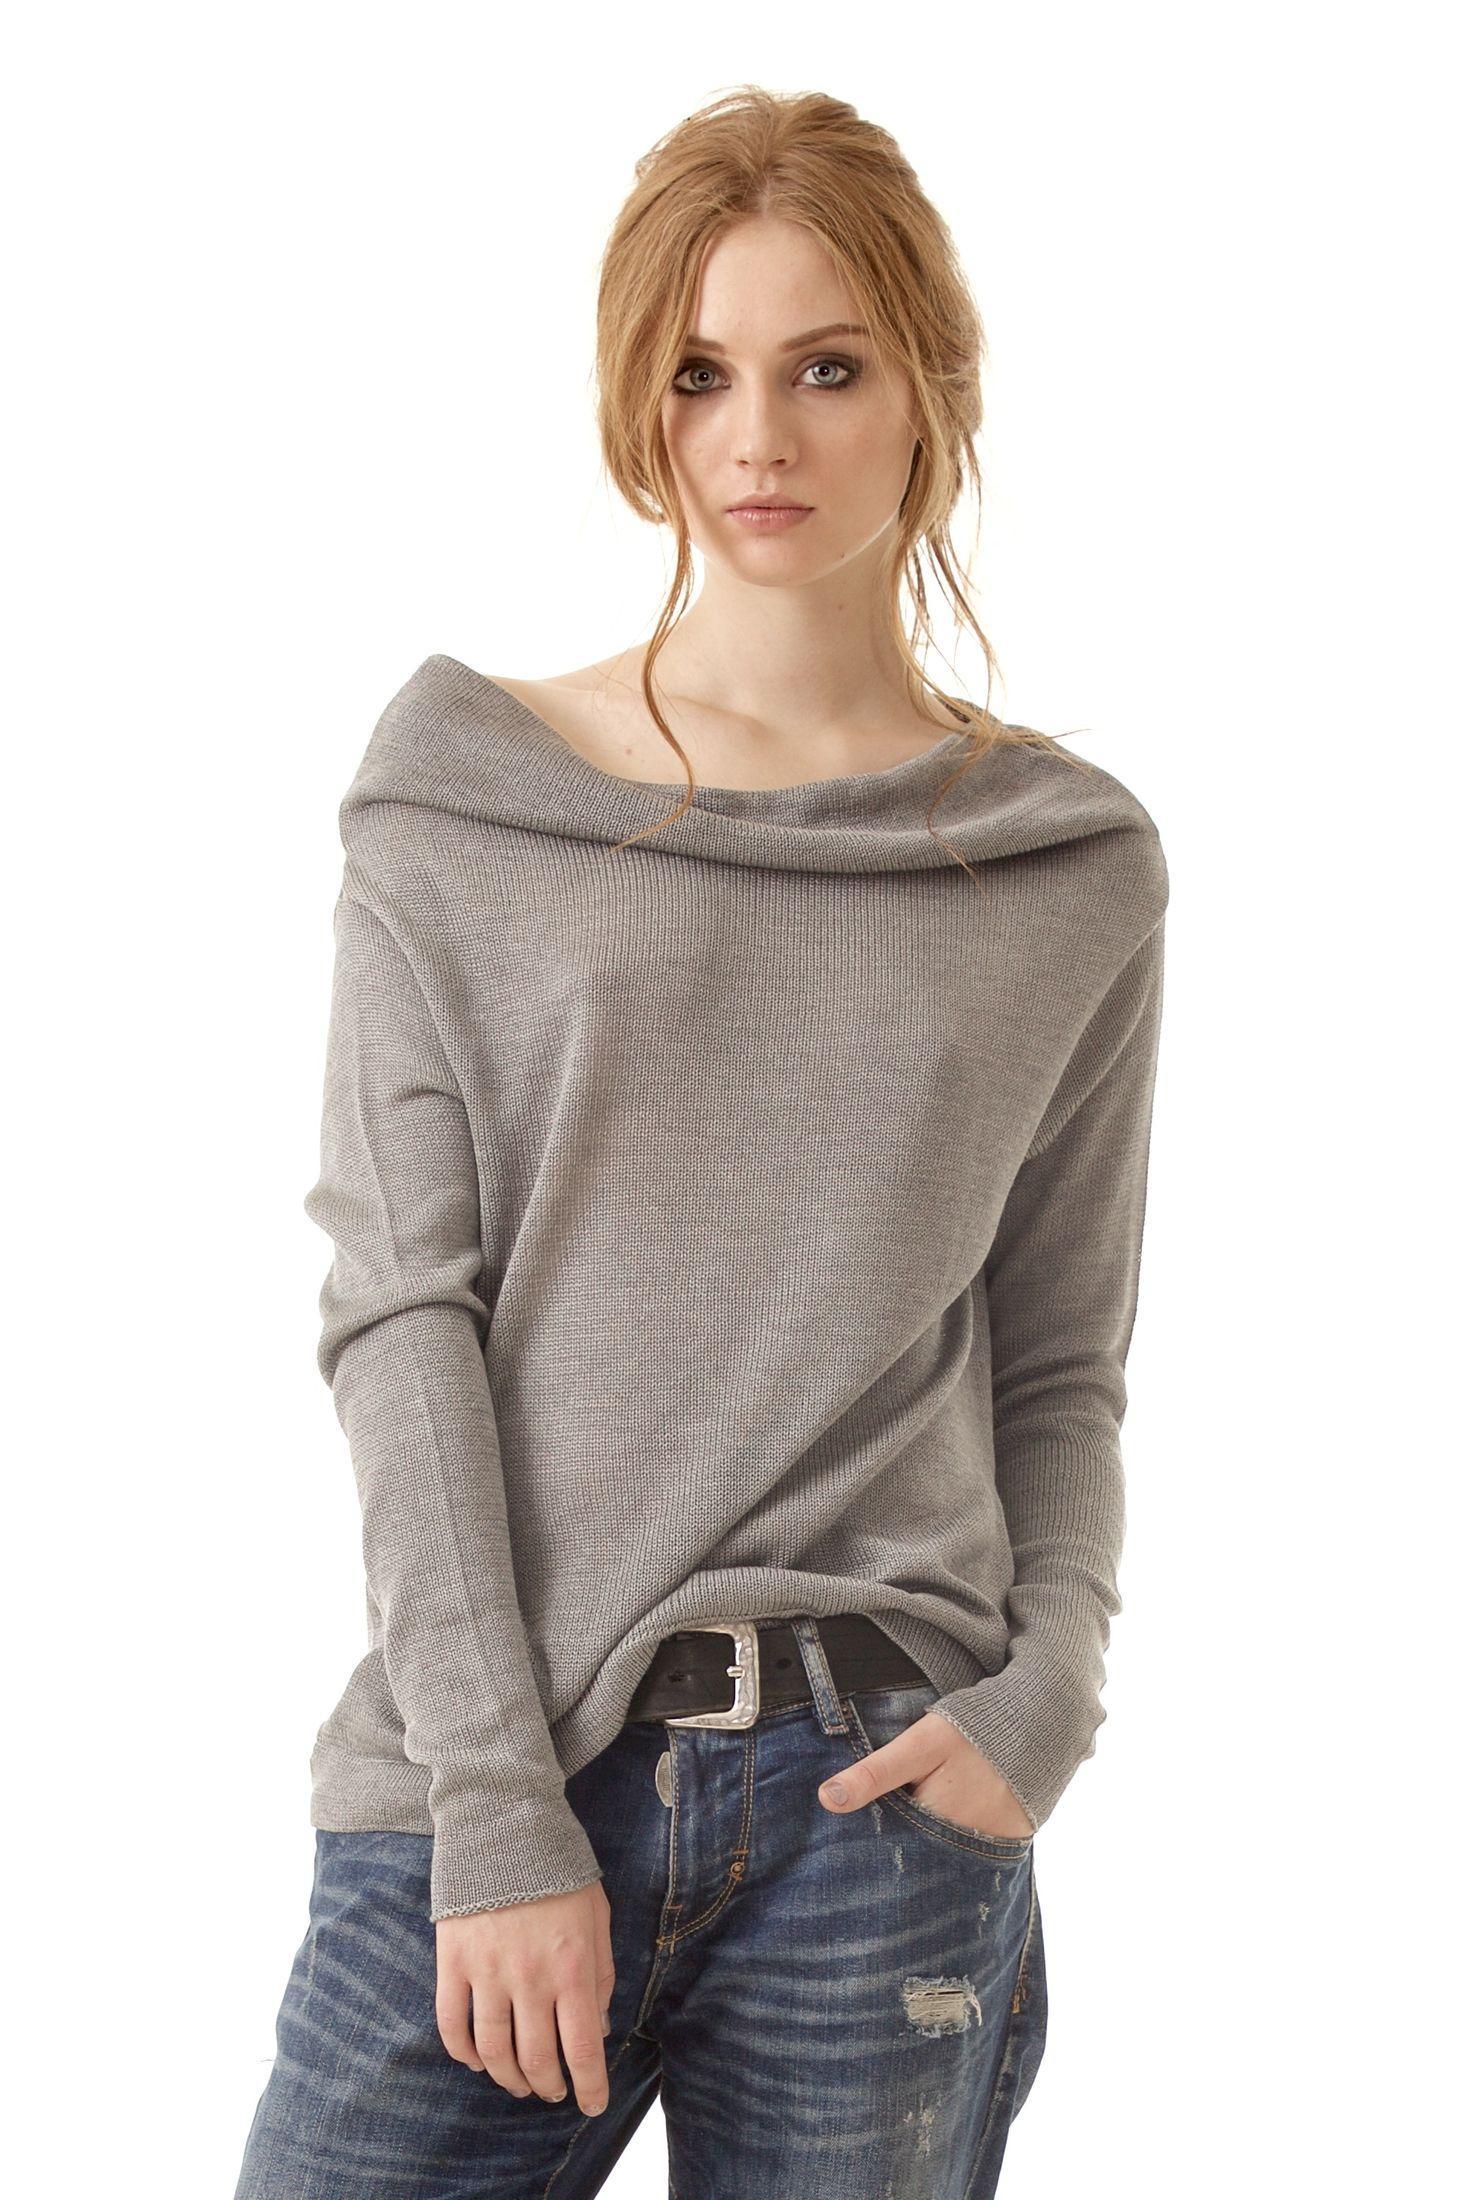 Shop AGNES, Krista Elsta's off-the-shoulder grey sweater, a bestseller crafted from 100% Italian cashmere. Its cowl collar and relaxed fit create an effortlessly chic style suitable for any occasion.